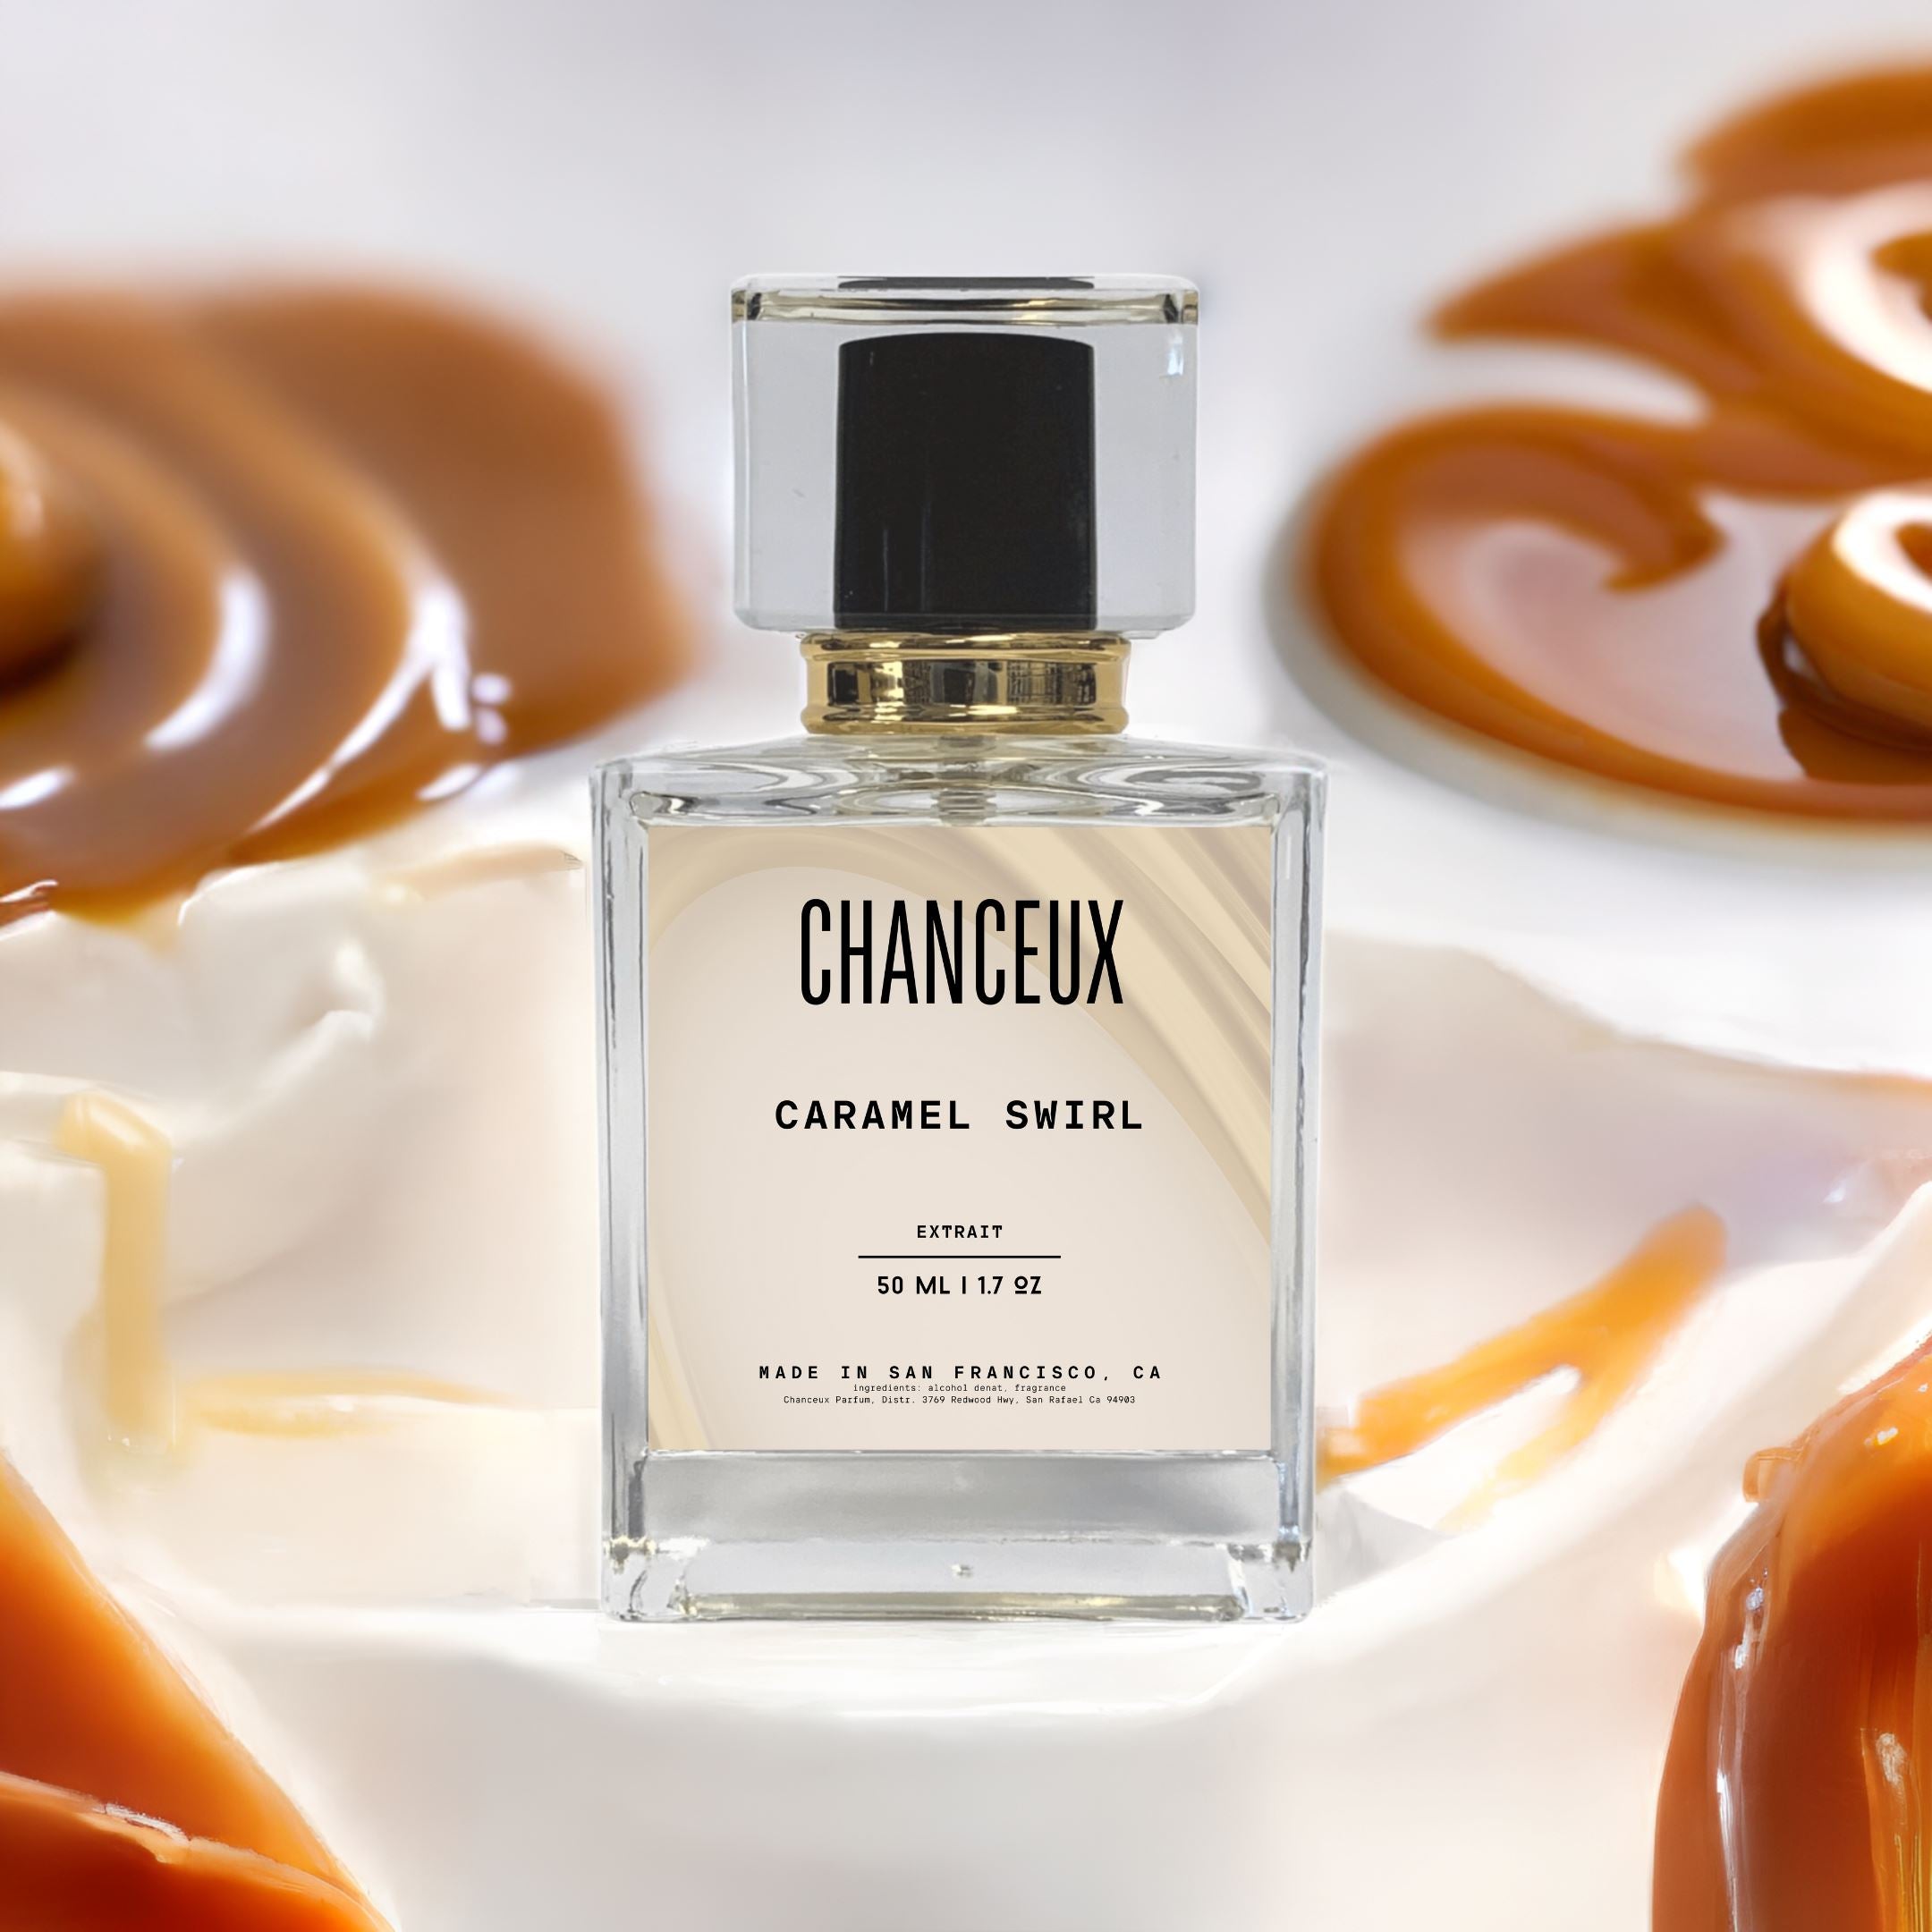 Caramel Swirl Perfume: A Fragrance That Lasts, and Lasts…